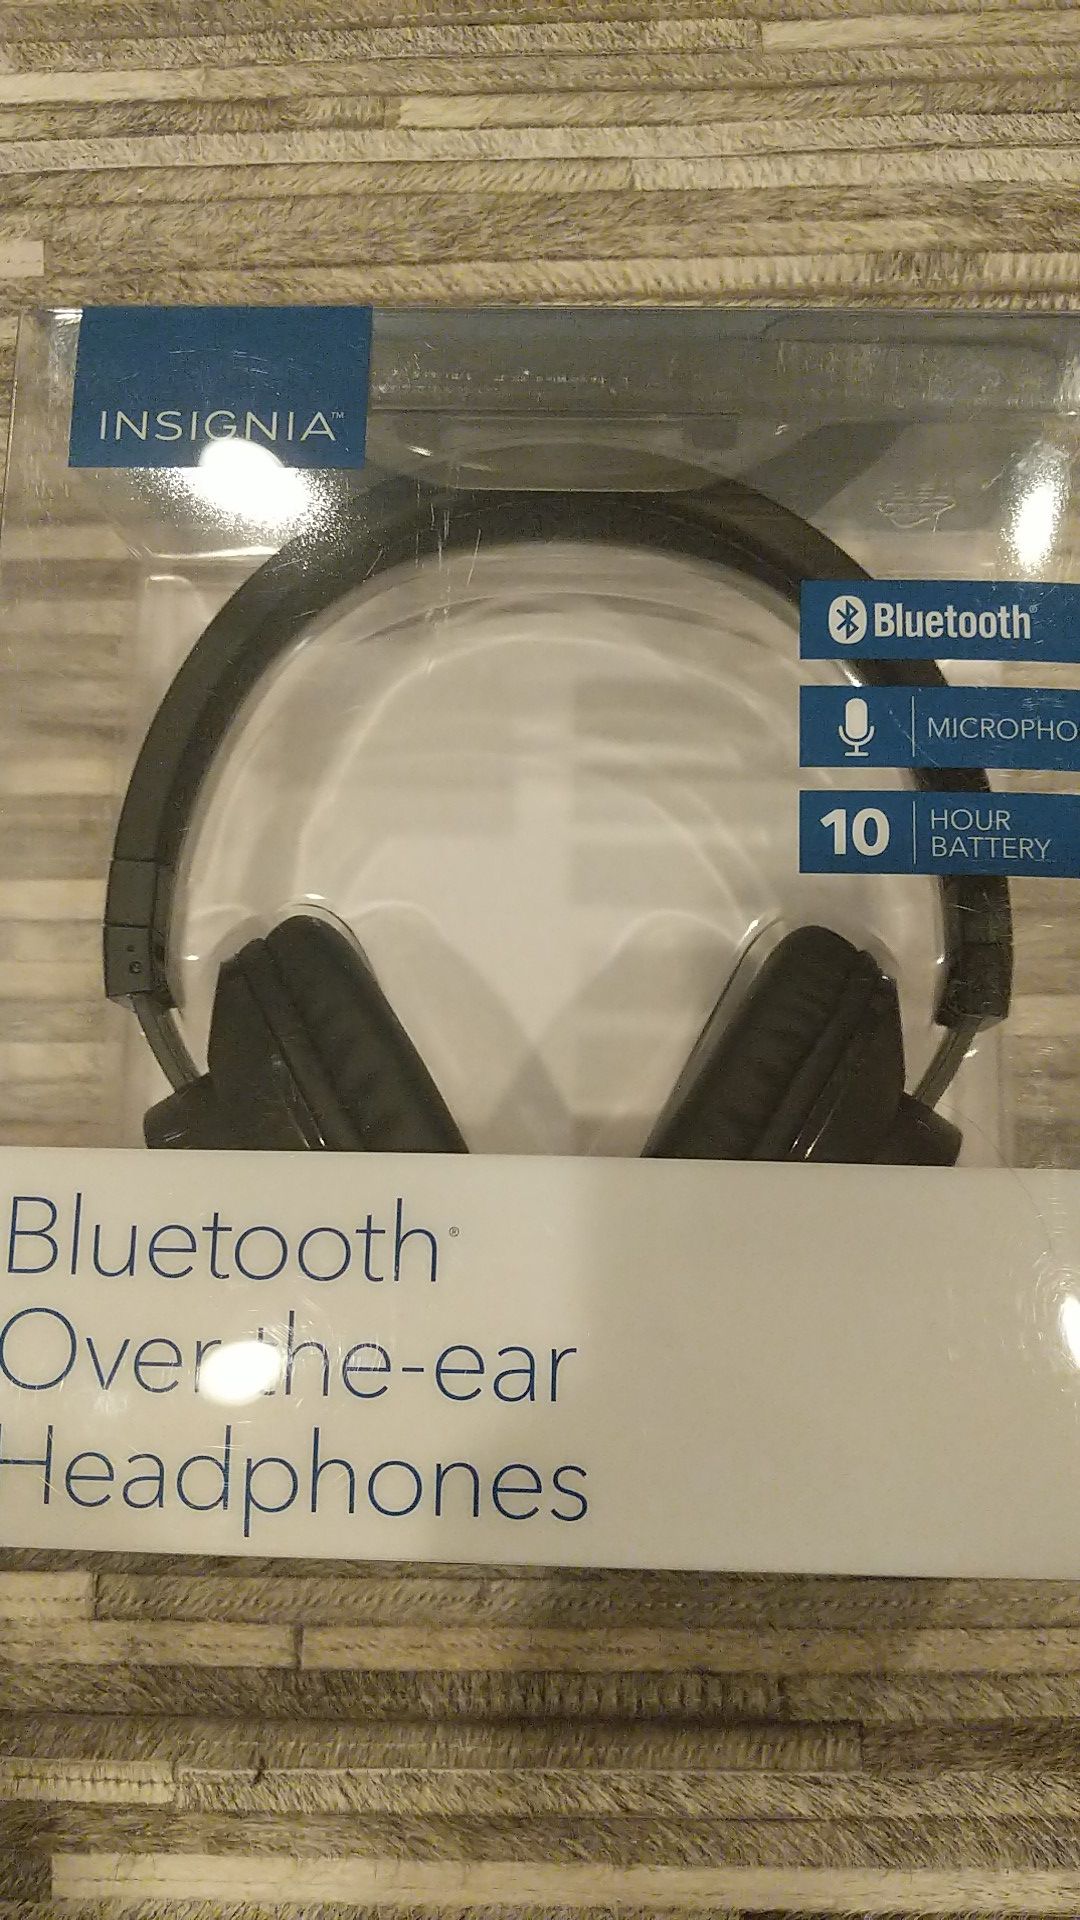 Insignia Bluetooth Wireless Over-the-ear Headphone - NEW SEALED